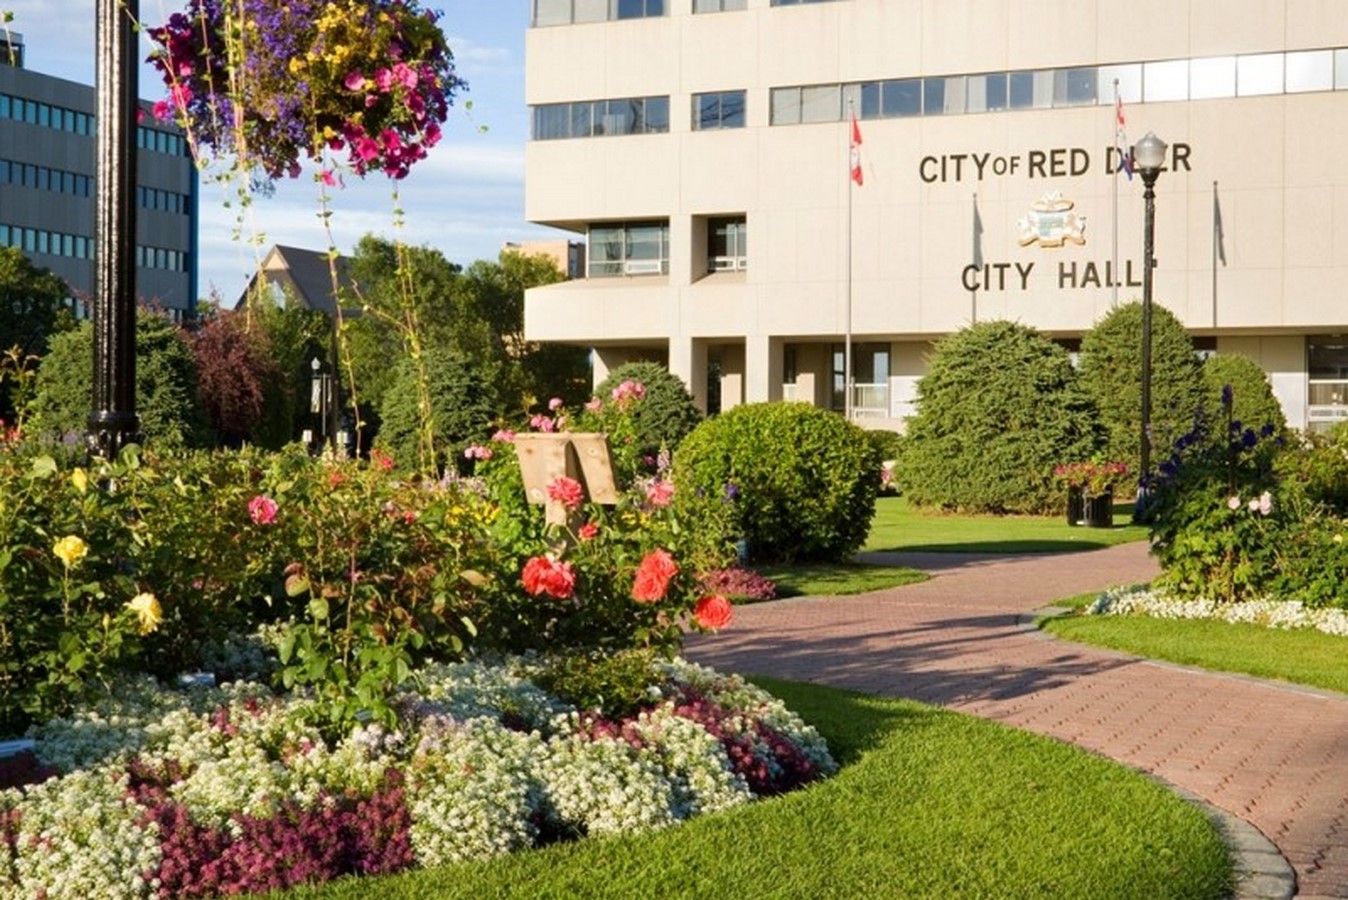 Architecture of Cities Red Deer- Canada's most entrepreneurial cities - Sheet5